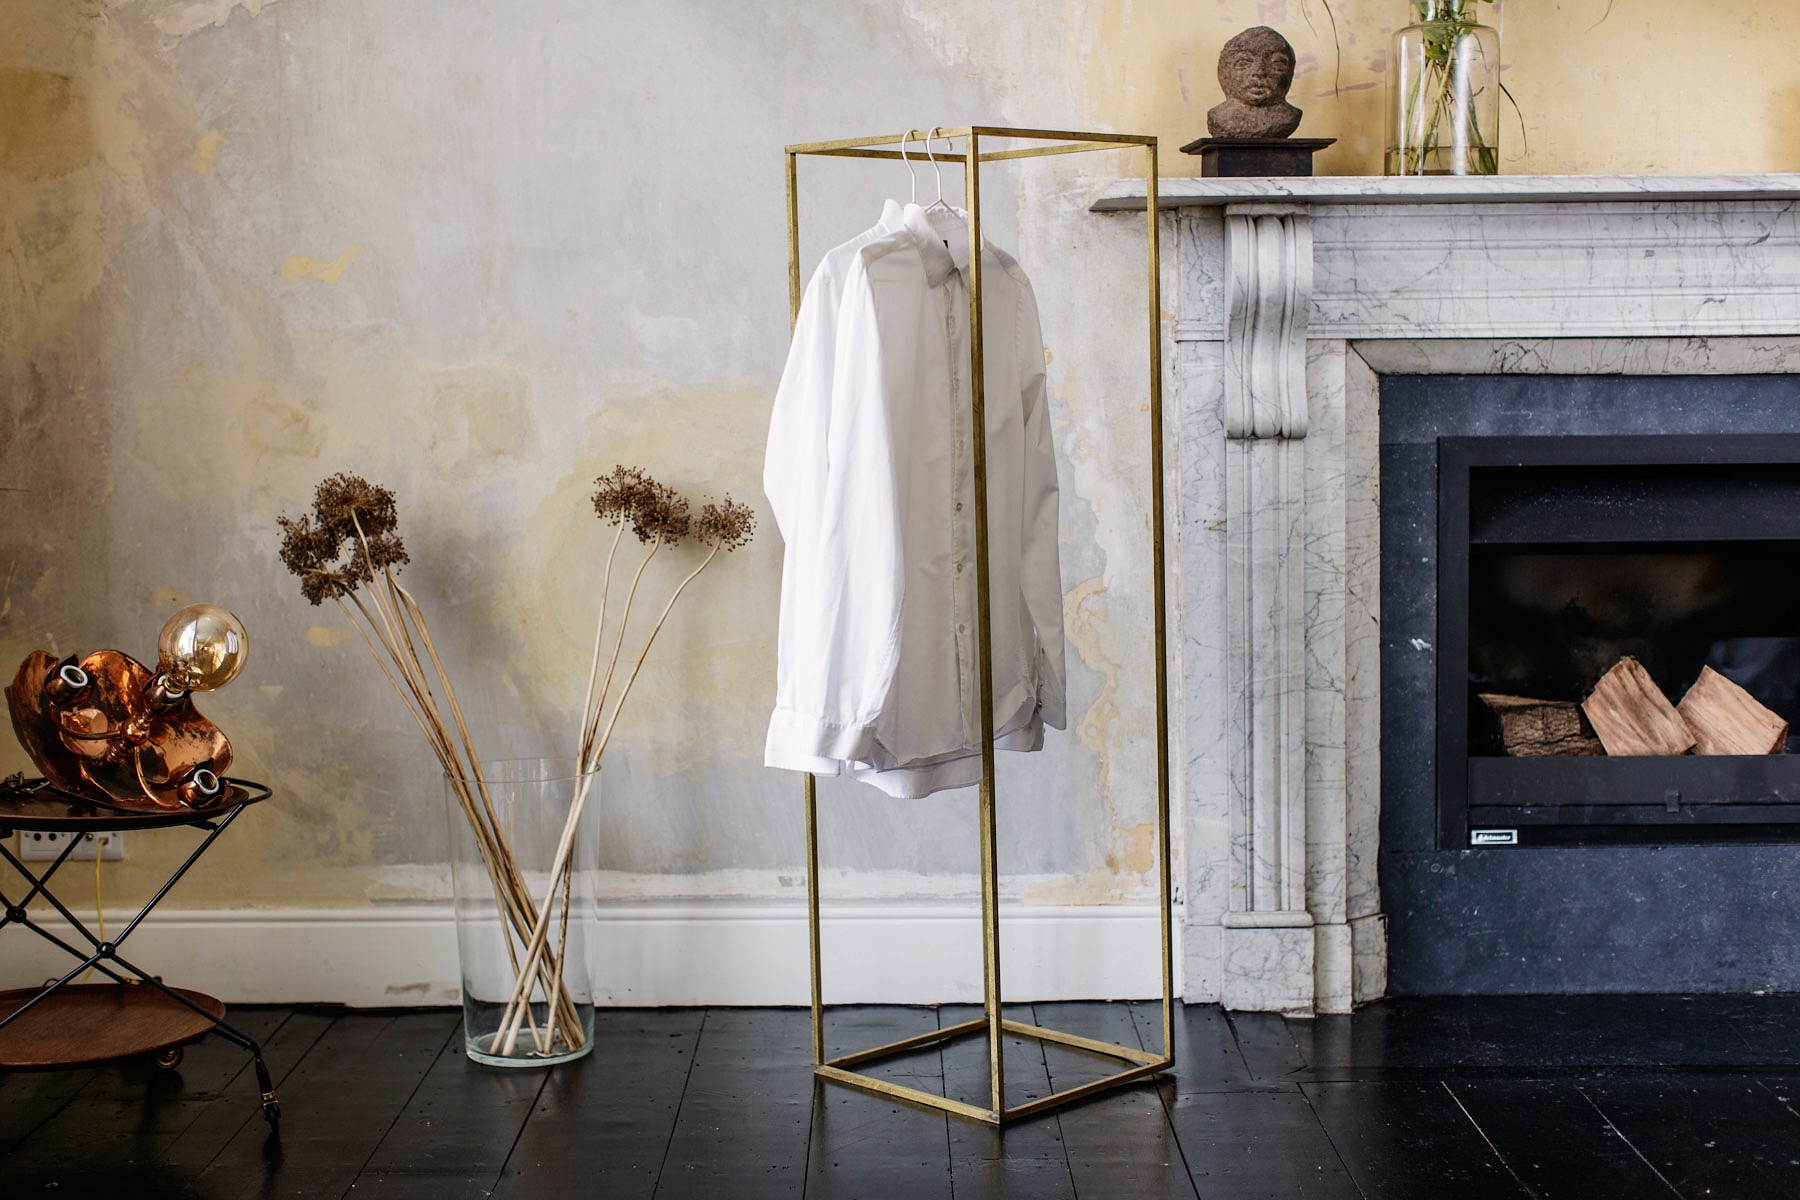 Brass Clothes Rail — Elements of Action